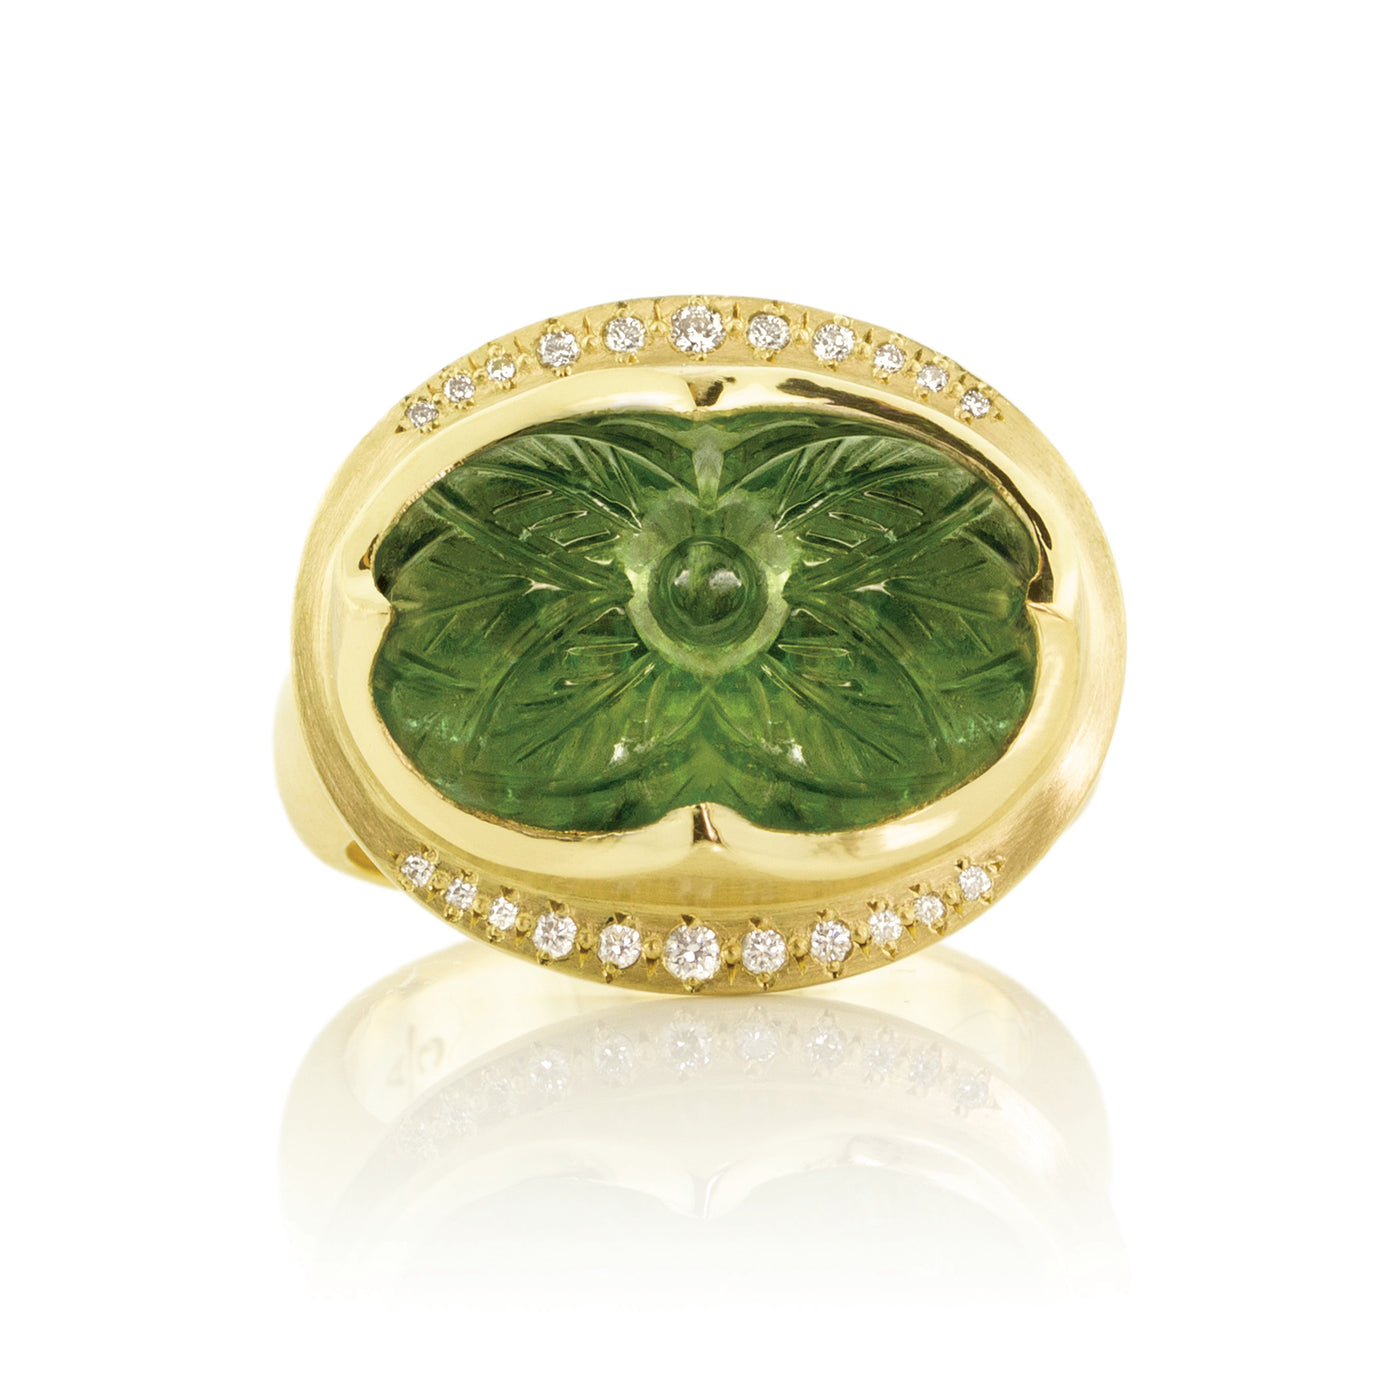 Carved Green Tourmaline in Diamond Crown Setting